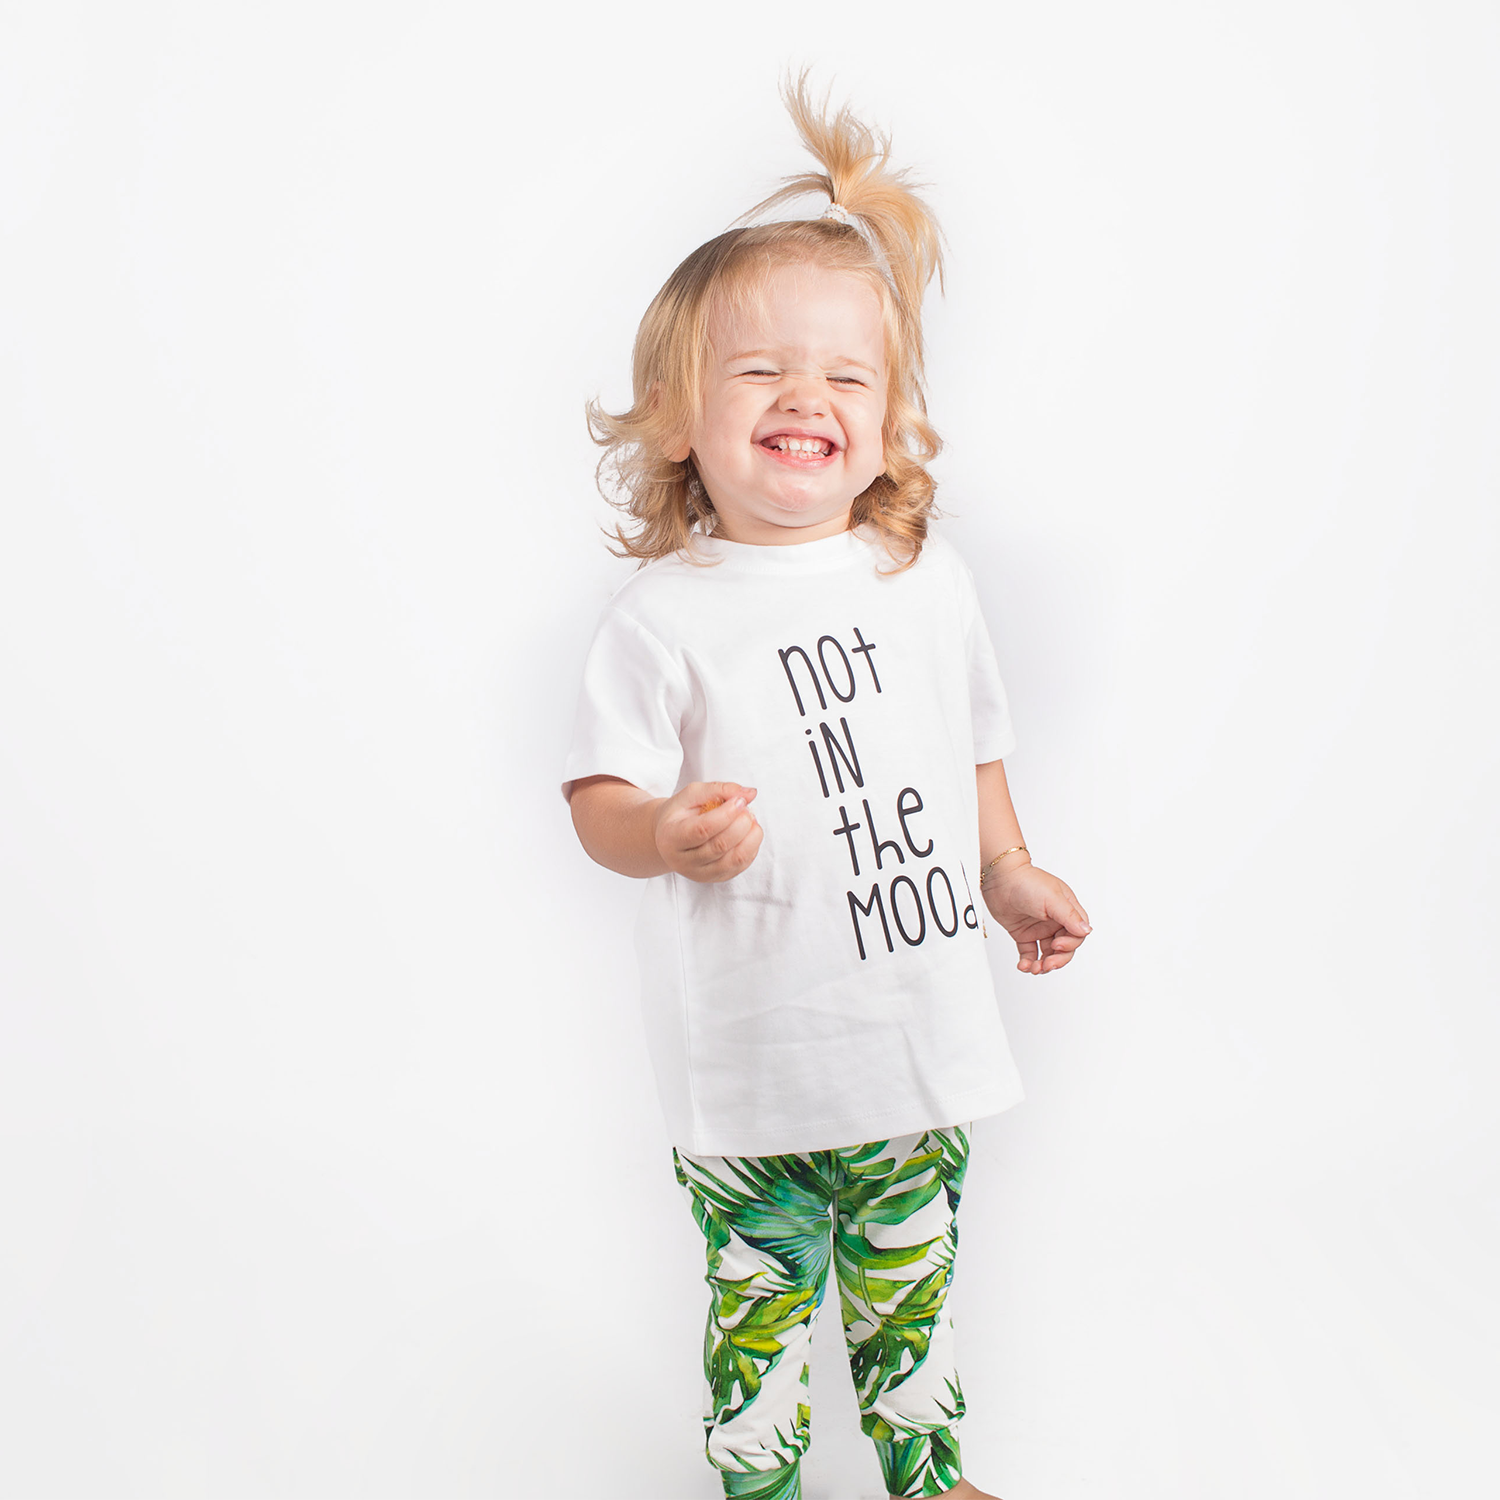 'Not in the mood' baby shortsleeve shirt